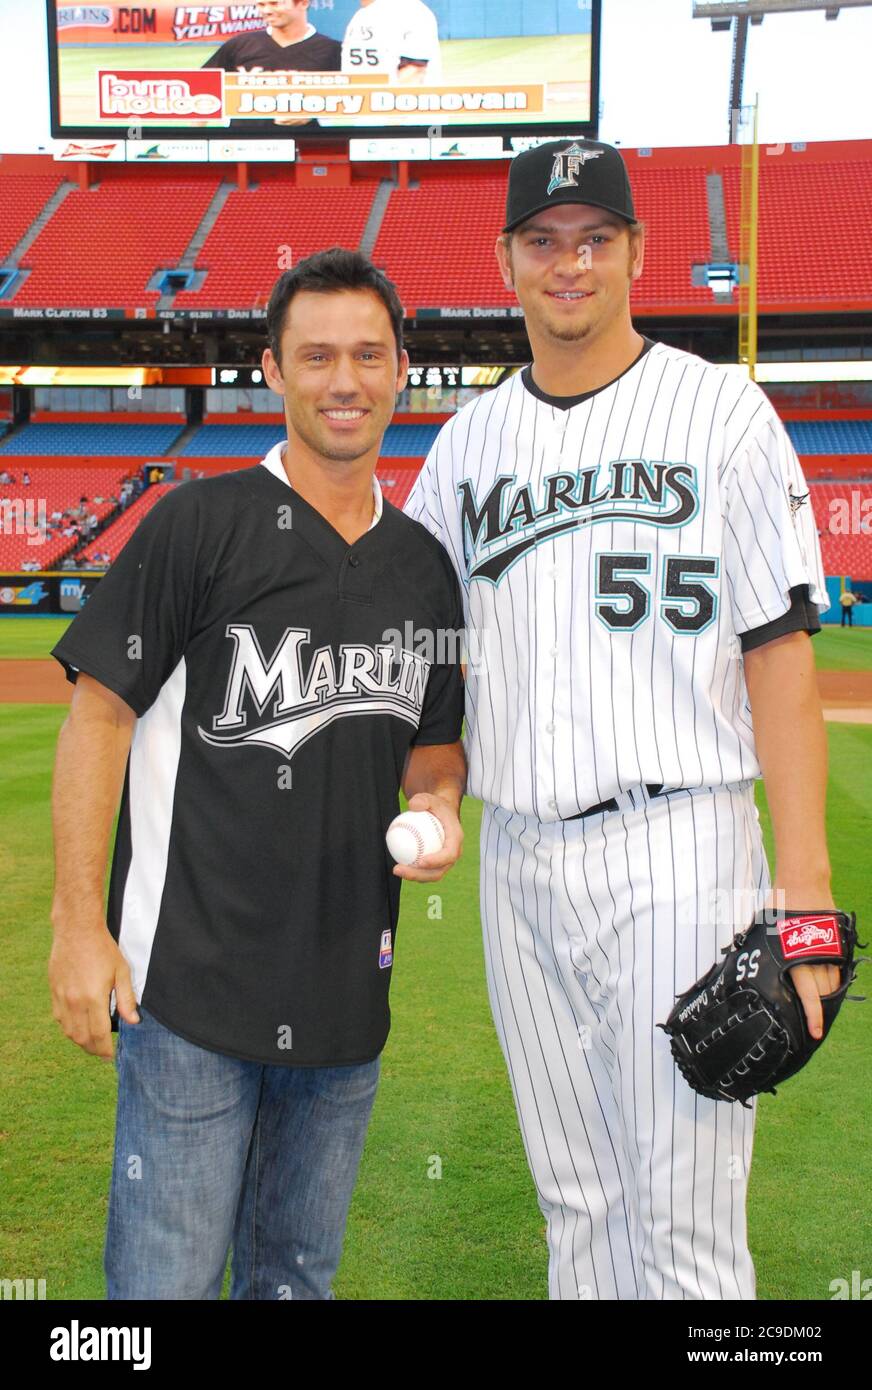 MIAMI, FL - June 6: Actor Jeffrey Donovan star of 'Burn Notice' throws out the first pitch before at a Florida Marlins home game at Dolphin Stadium on June 6, 2009 in Miami, Florida.  People;  Jeffrey Donovan Stock Photo